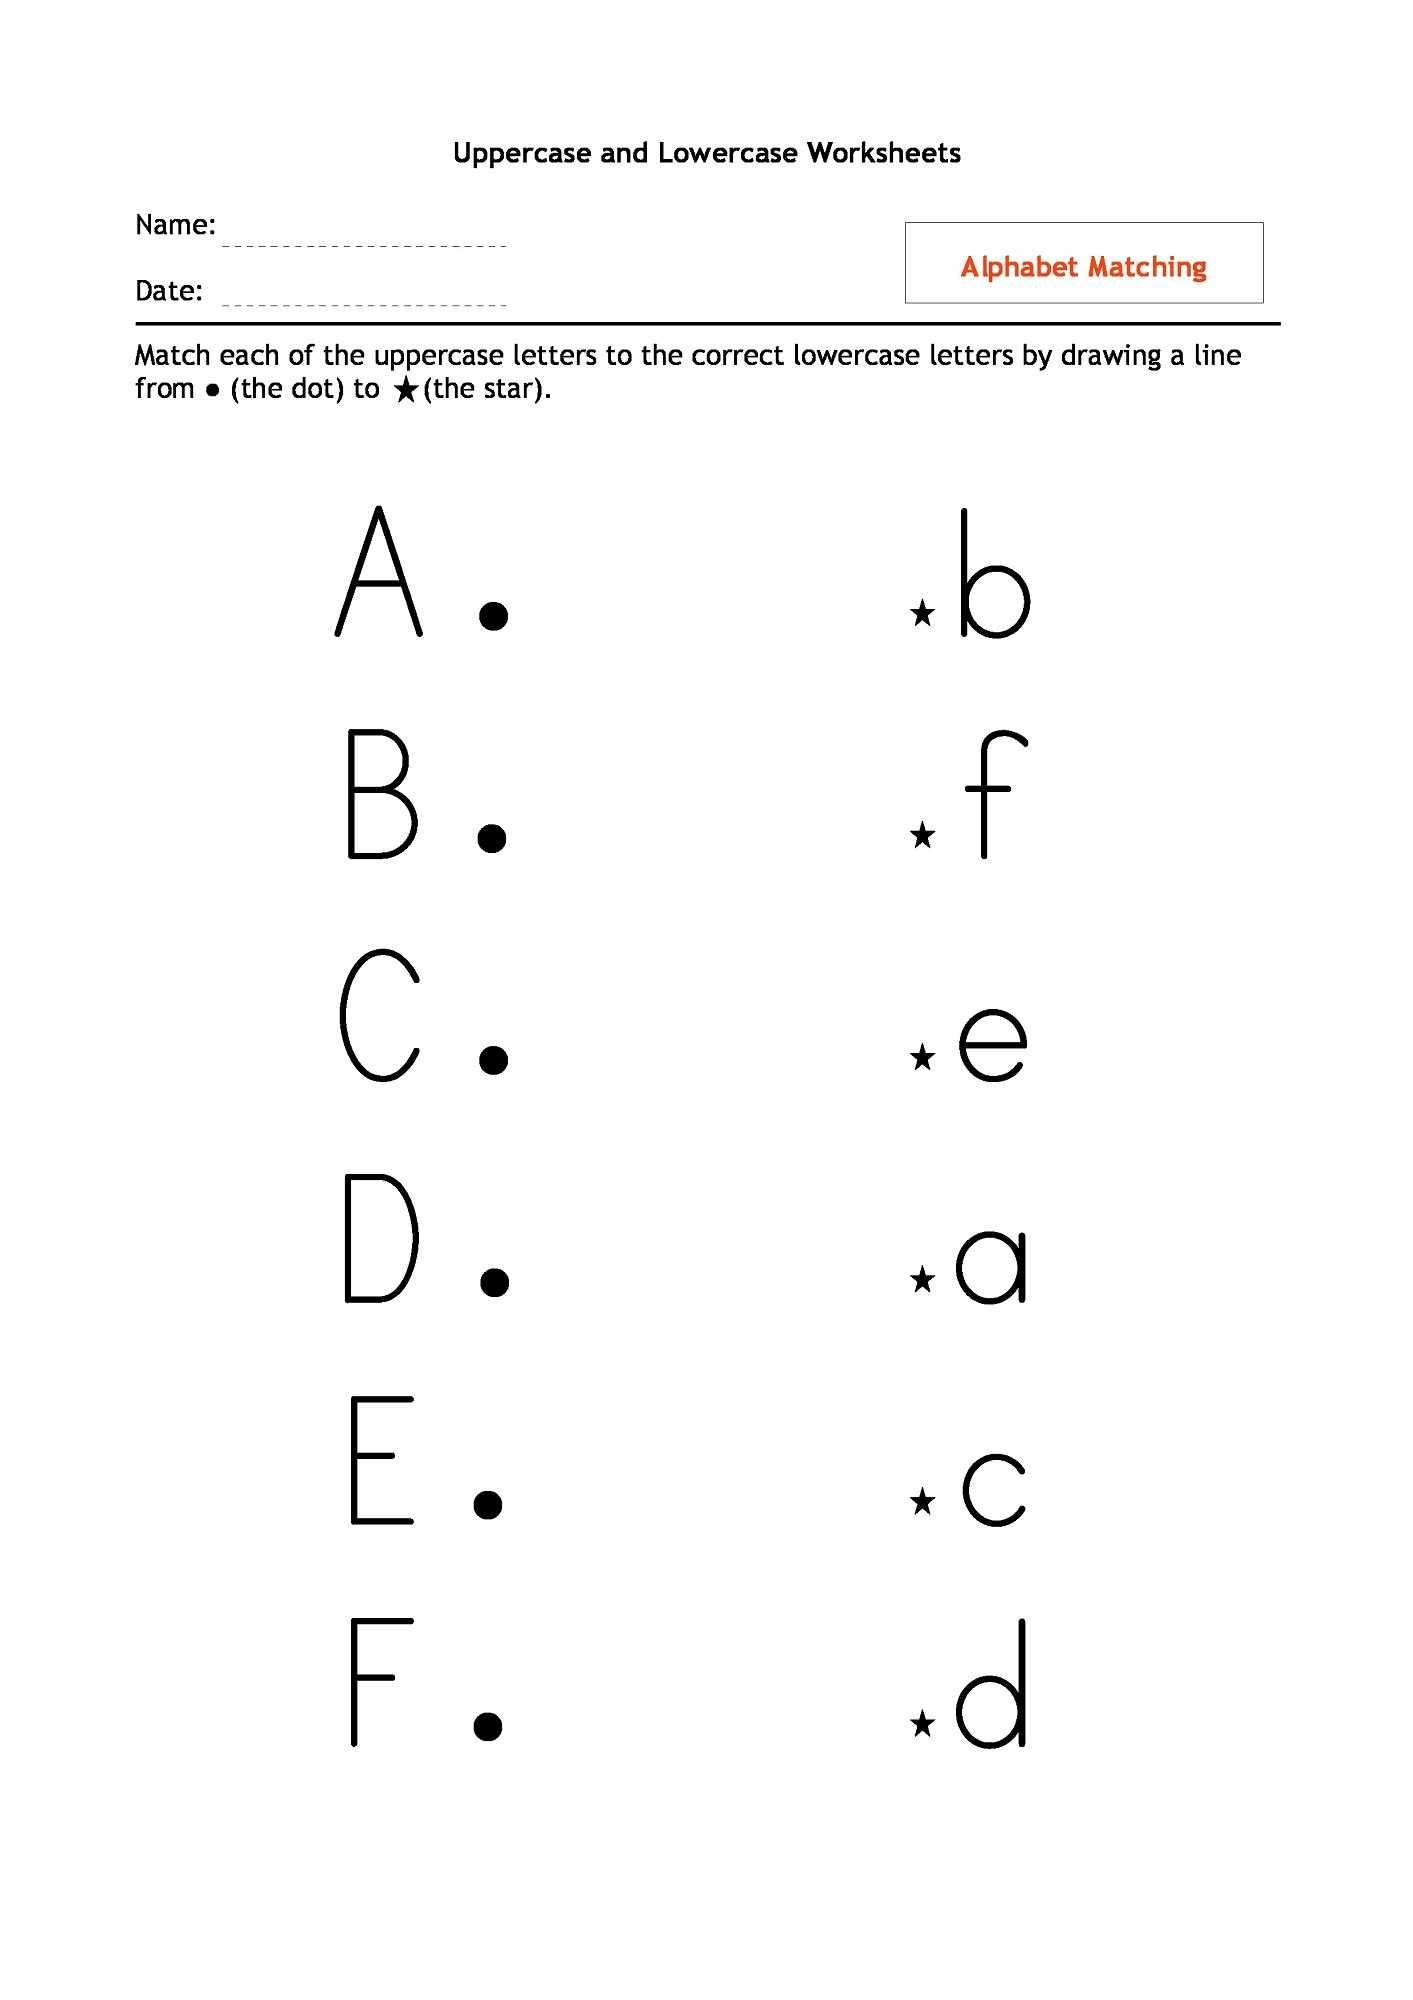 Learning Letters and Numbers Worksheets together with Uppercase and Lowercase Worksheets to Learn Alphabet